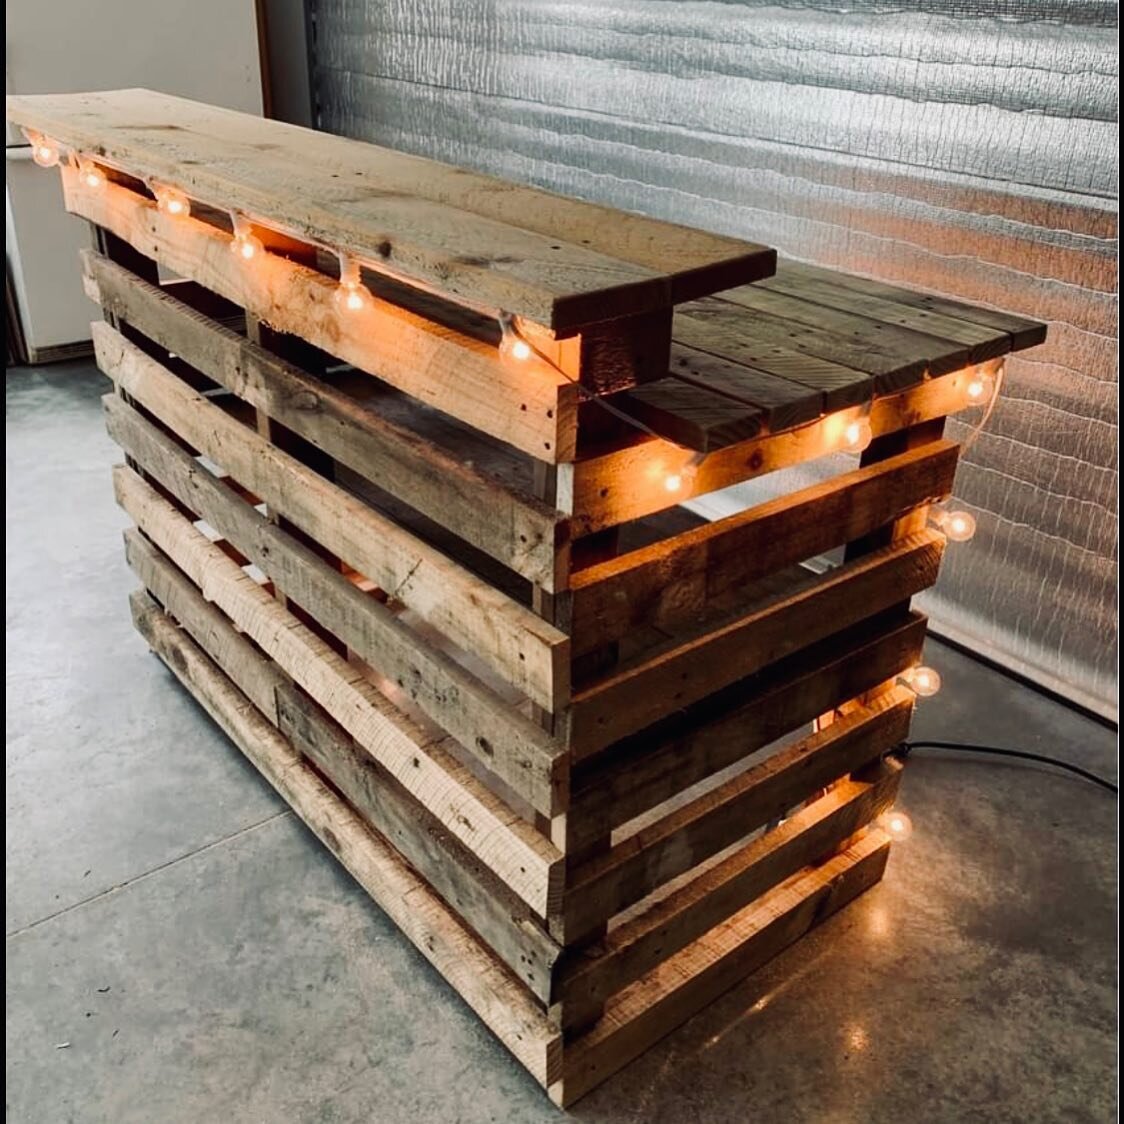 Building some pallet bars for fun. This one is listed for $200, lights included 🍻✨

man cave approved ✔️

54 wide
41 height (top bar)
35 (lower bar)
26 deep